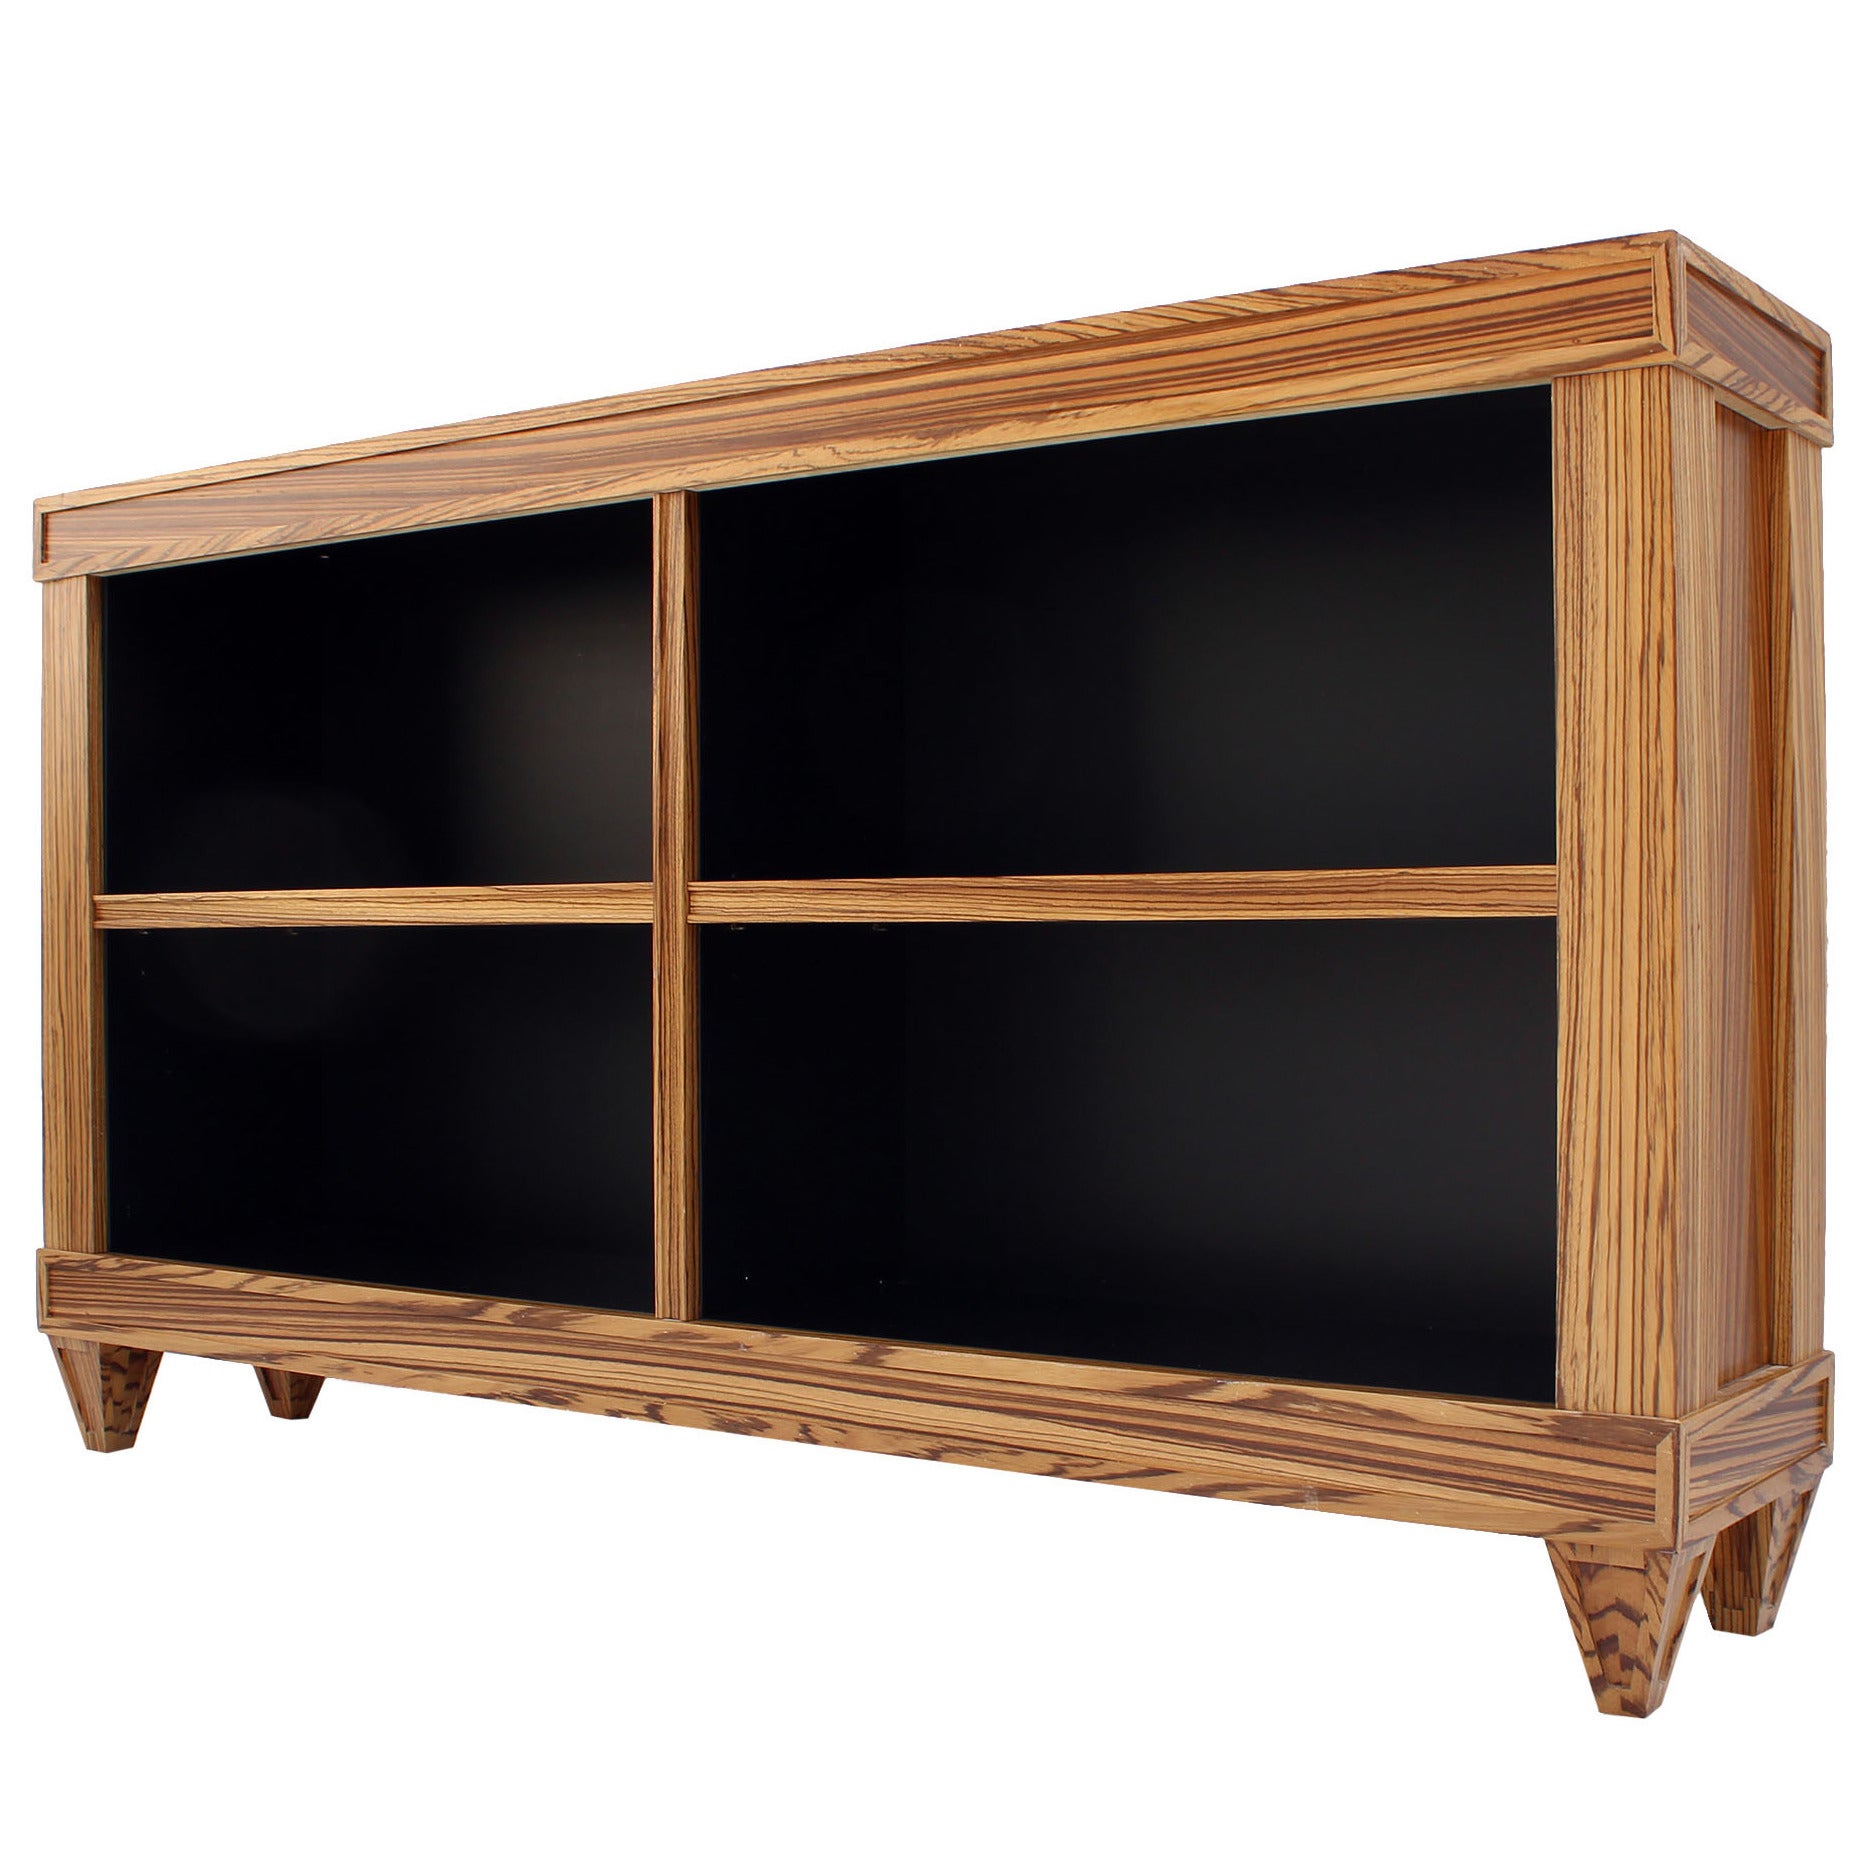 Custom Zebrawood Bookcases For Sale